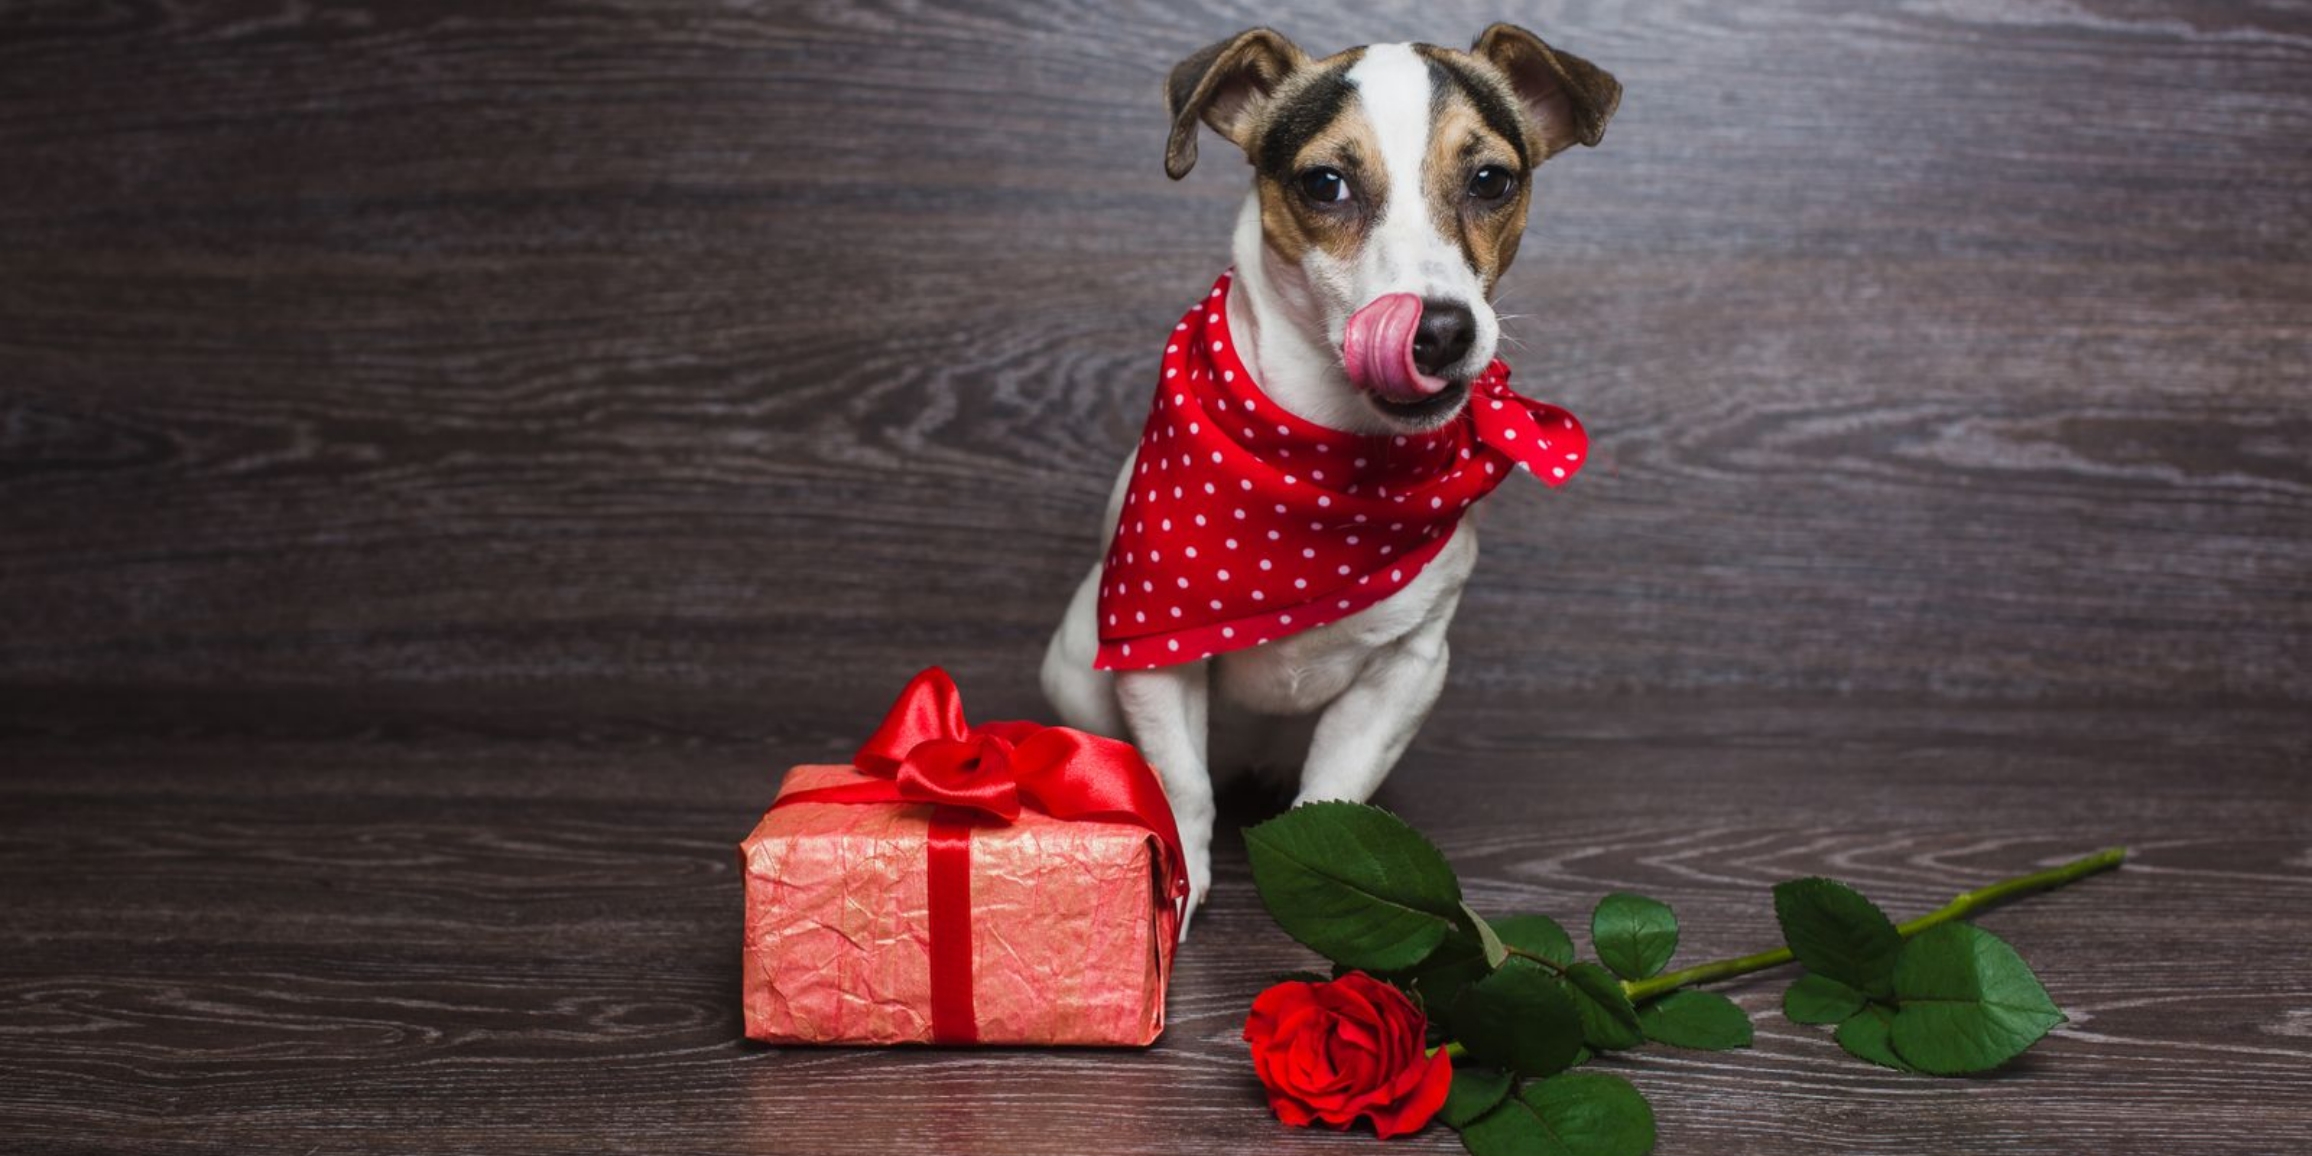 Dress-up Your Pet for Valentine’s Day with a Comfy, No-sew Bandana!